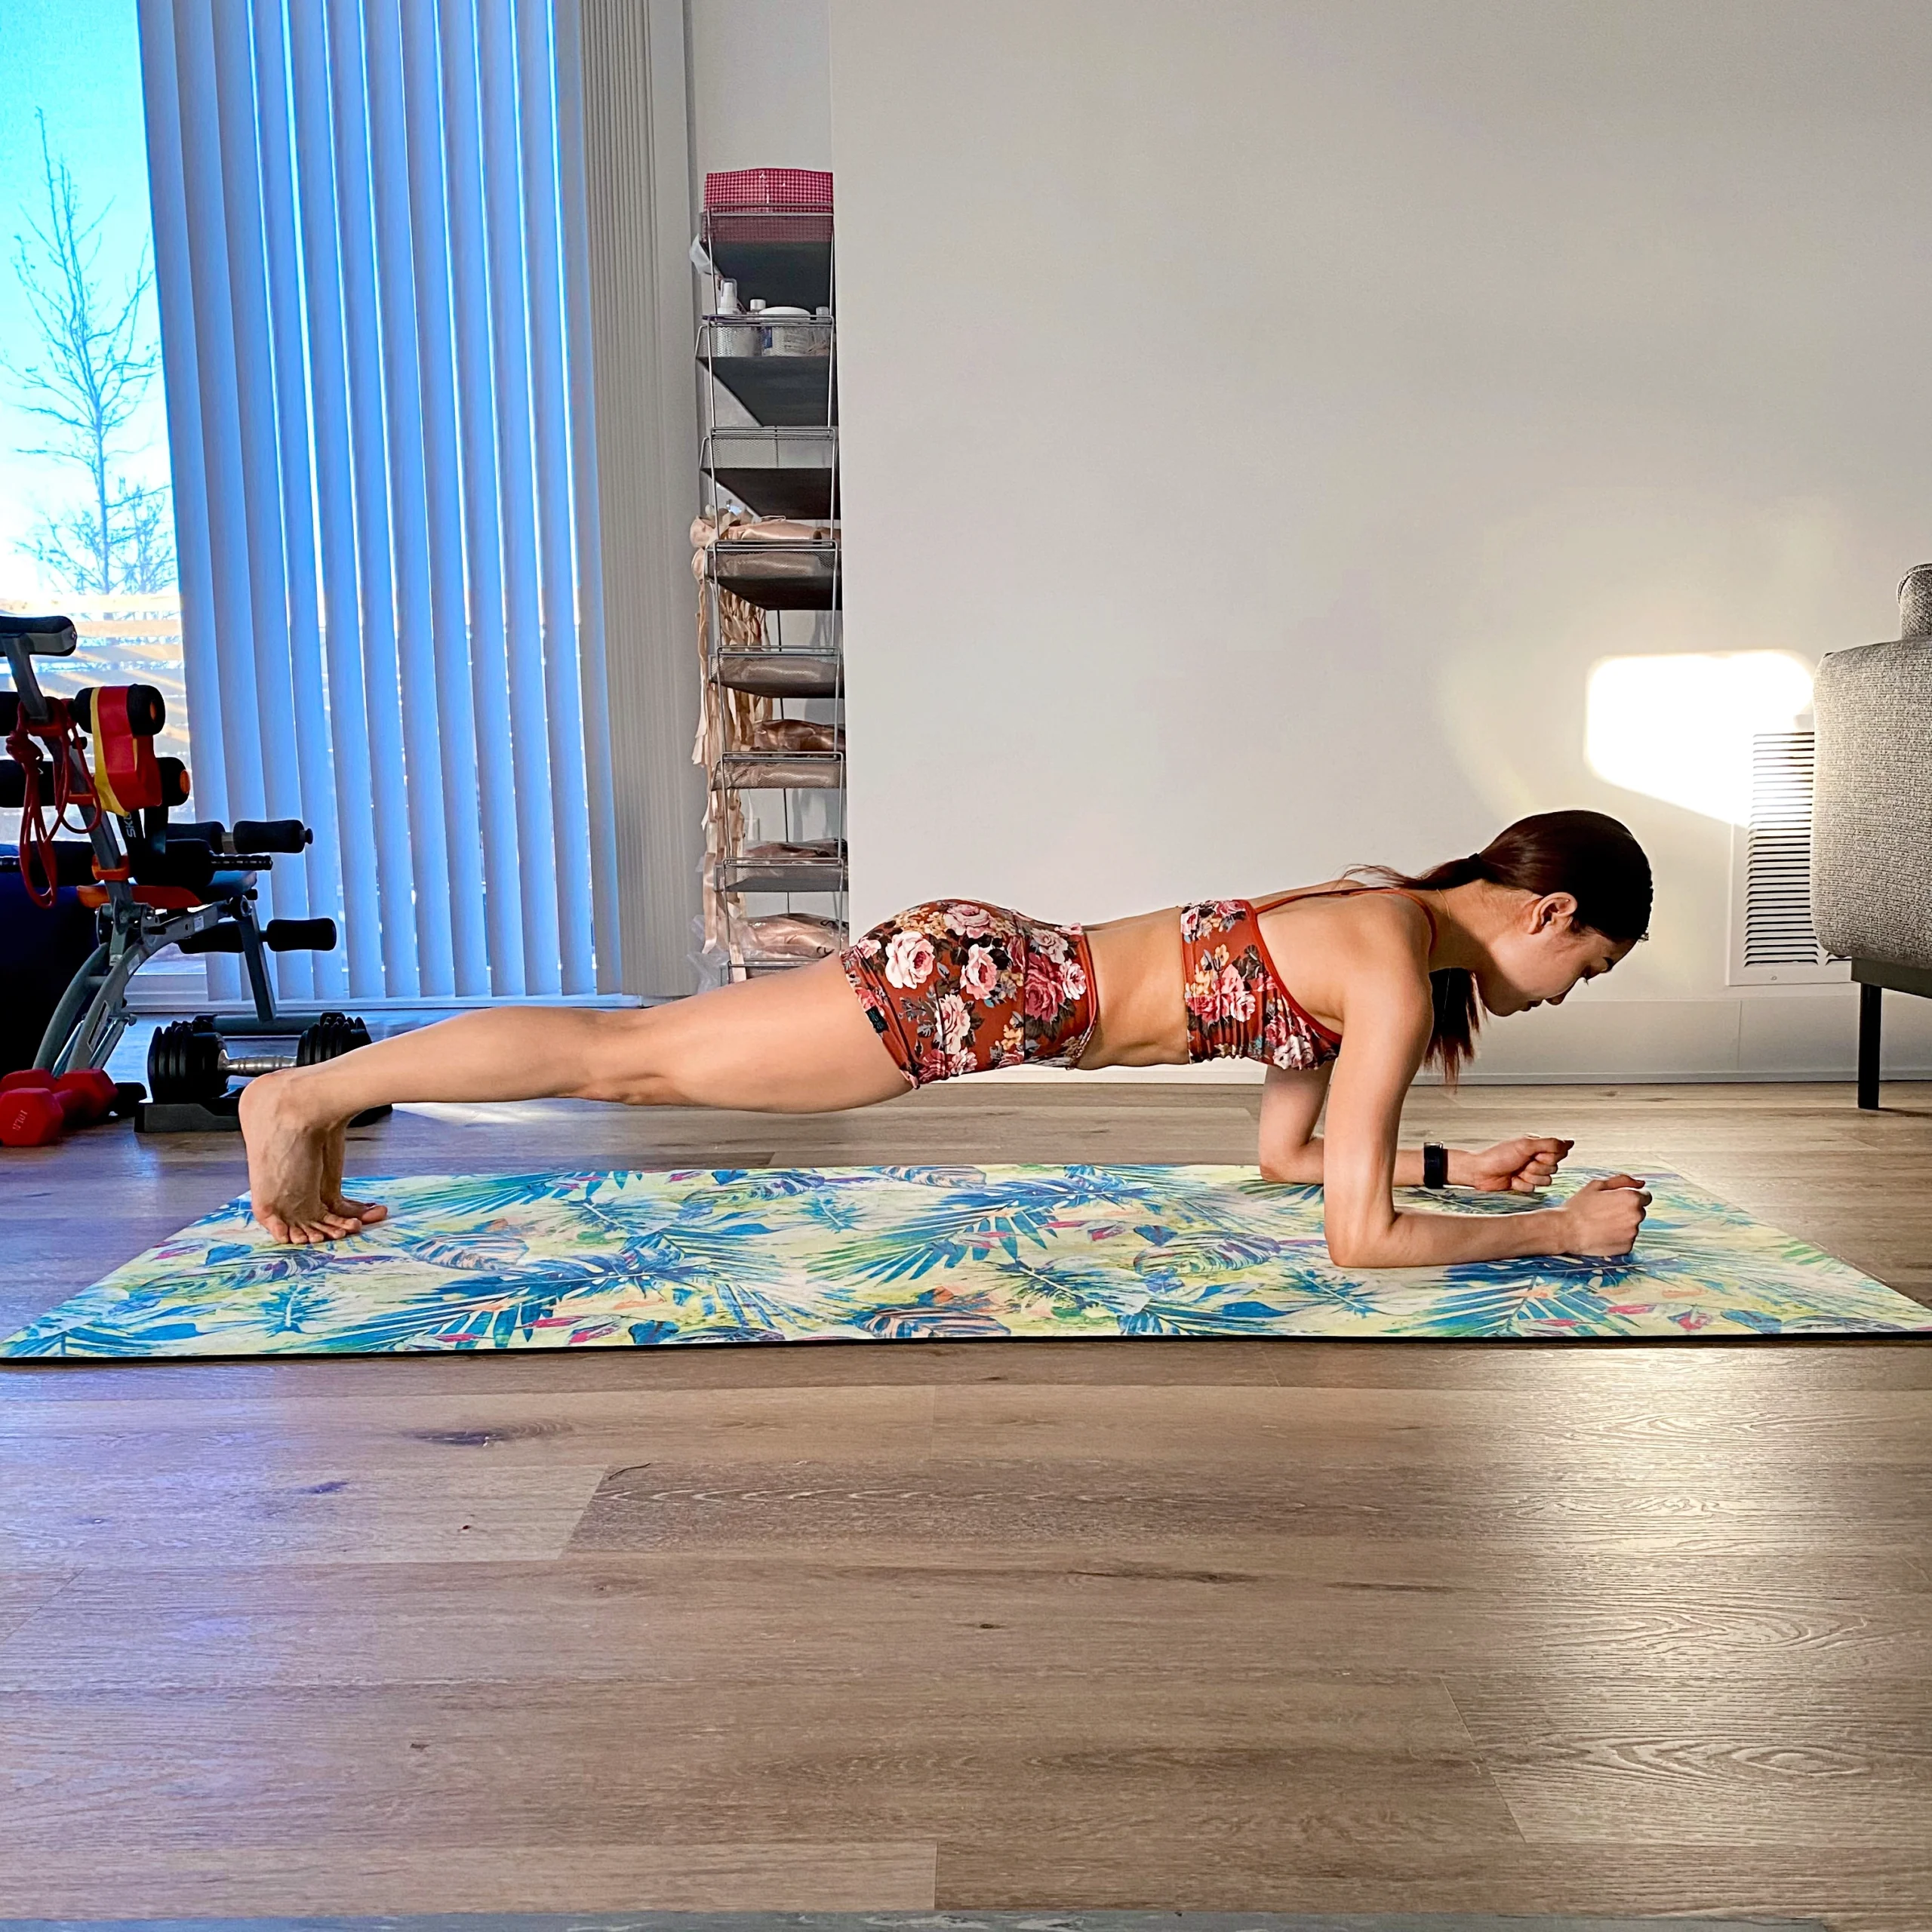 Yoshiko Kamikusa practices a plank exercise on a colorful yoga mat in her living room. She wears a pink and white floral sports bar and matching bootie shorts.